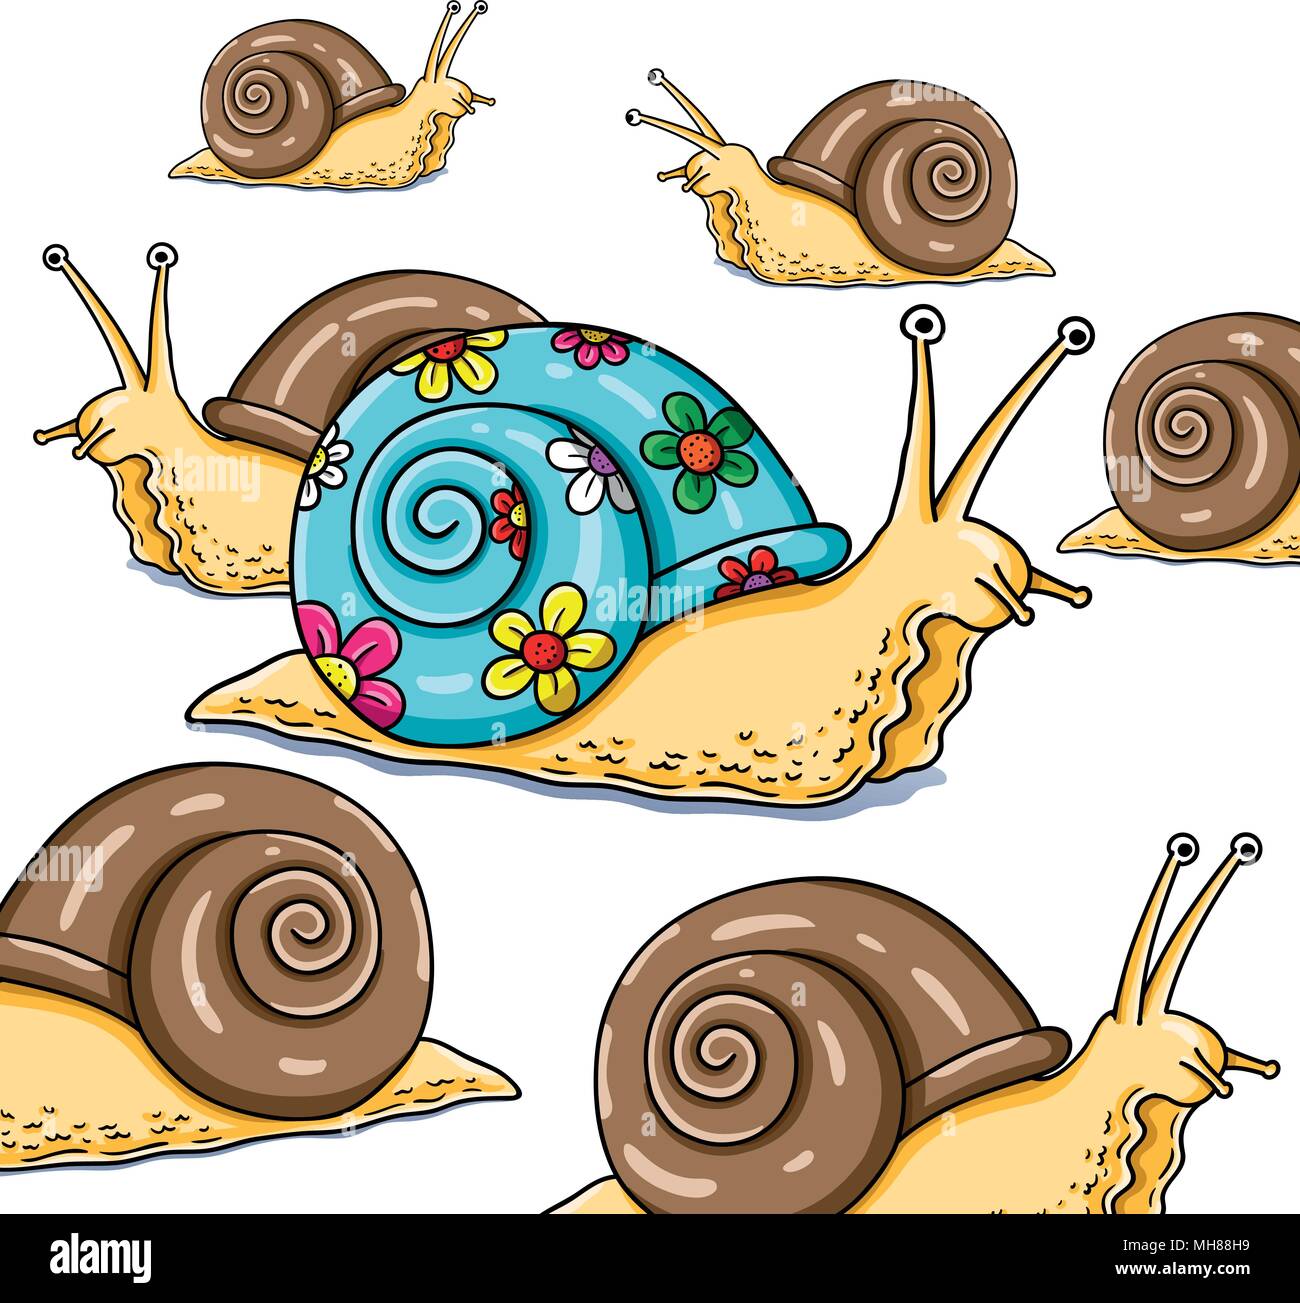 Funny vector illustration of snail with its shell colorfully painted, standing out the crowd. Stock Vector